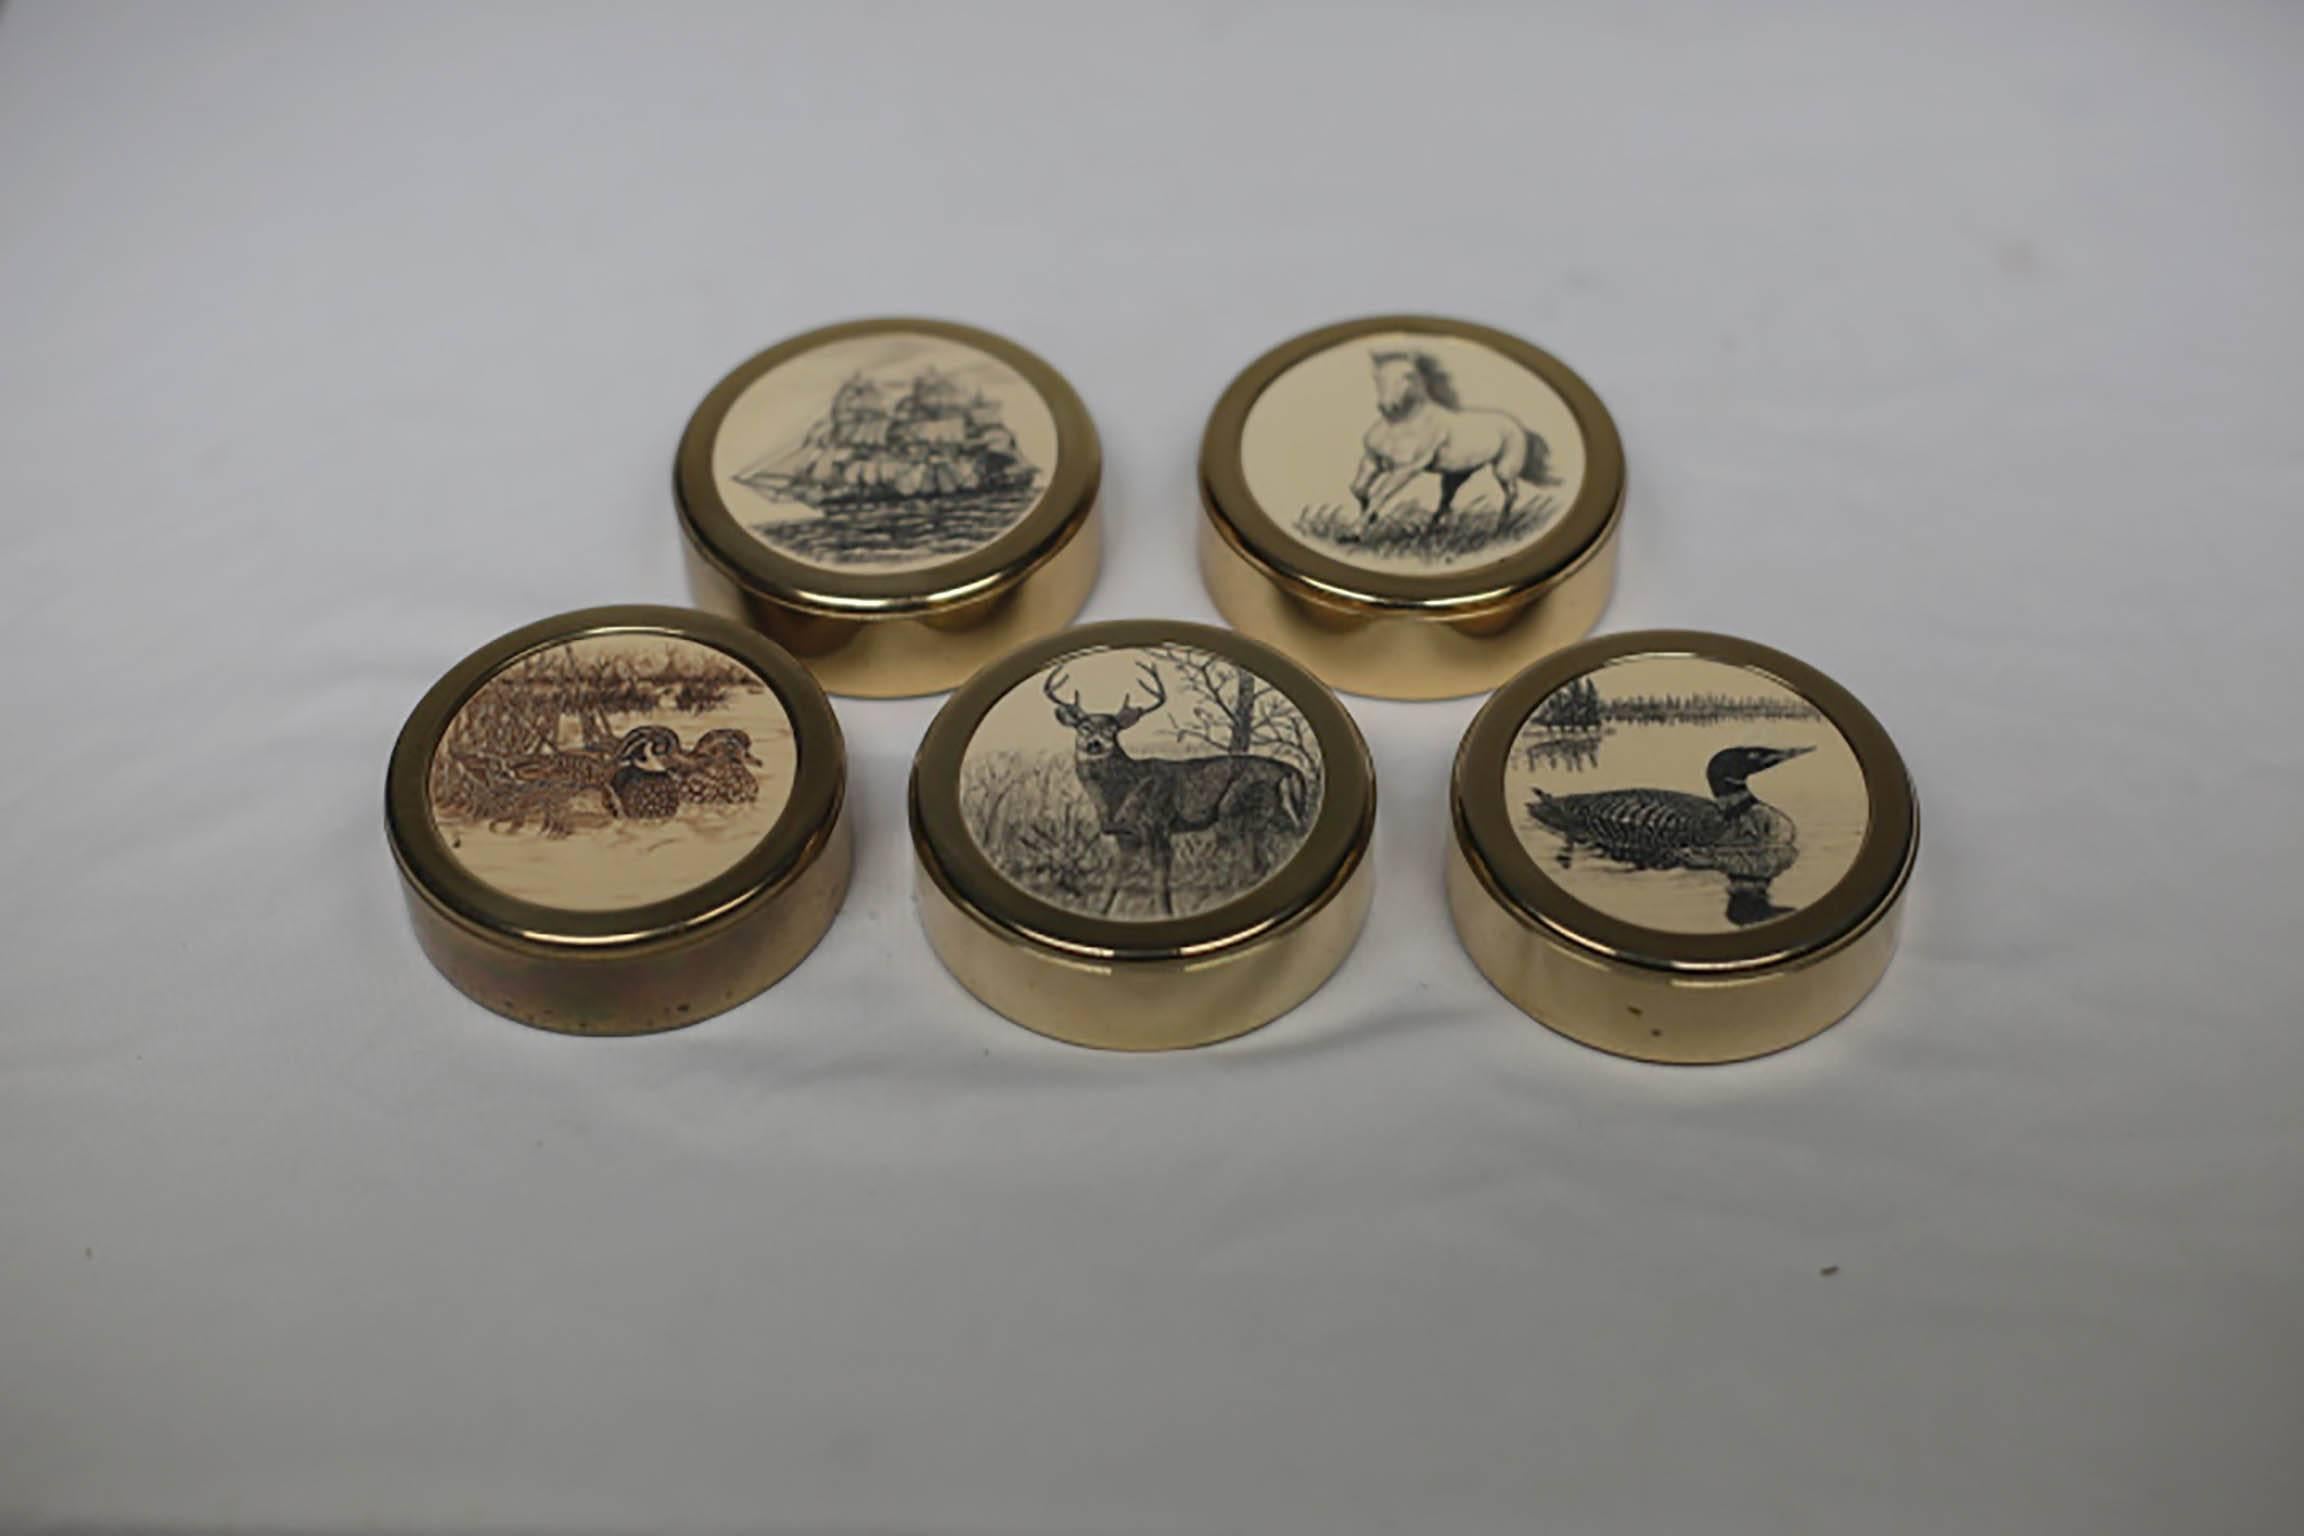 Collection of brass paperweight with fine detail carvings on an inset material possibly bone. 
Collection includes: 
Horse (Sold)
Ship
Loon (small indentation)
Ducks
Deer.